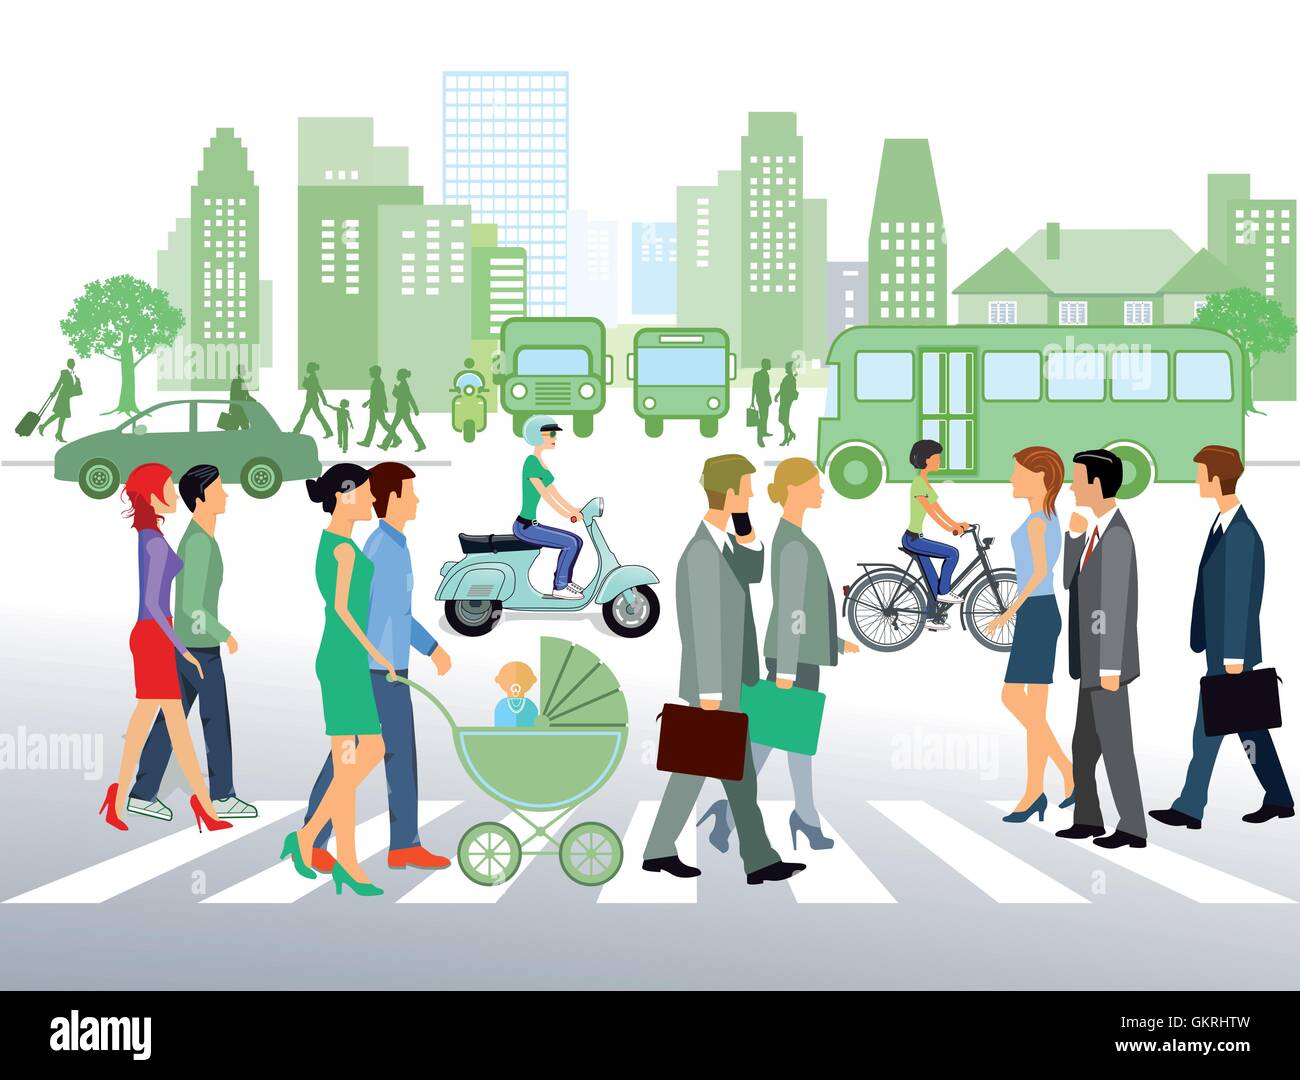 cityscape with people walking on the street Stock Vector